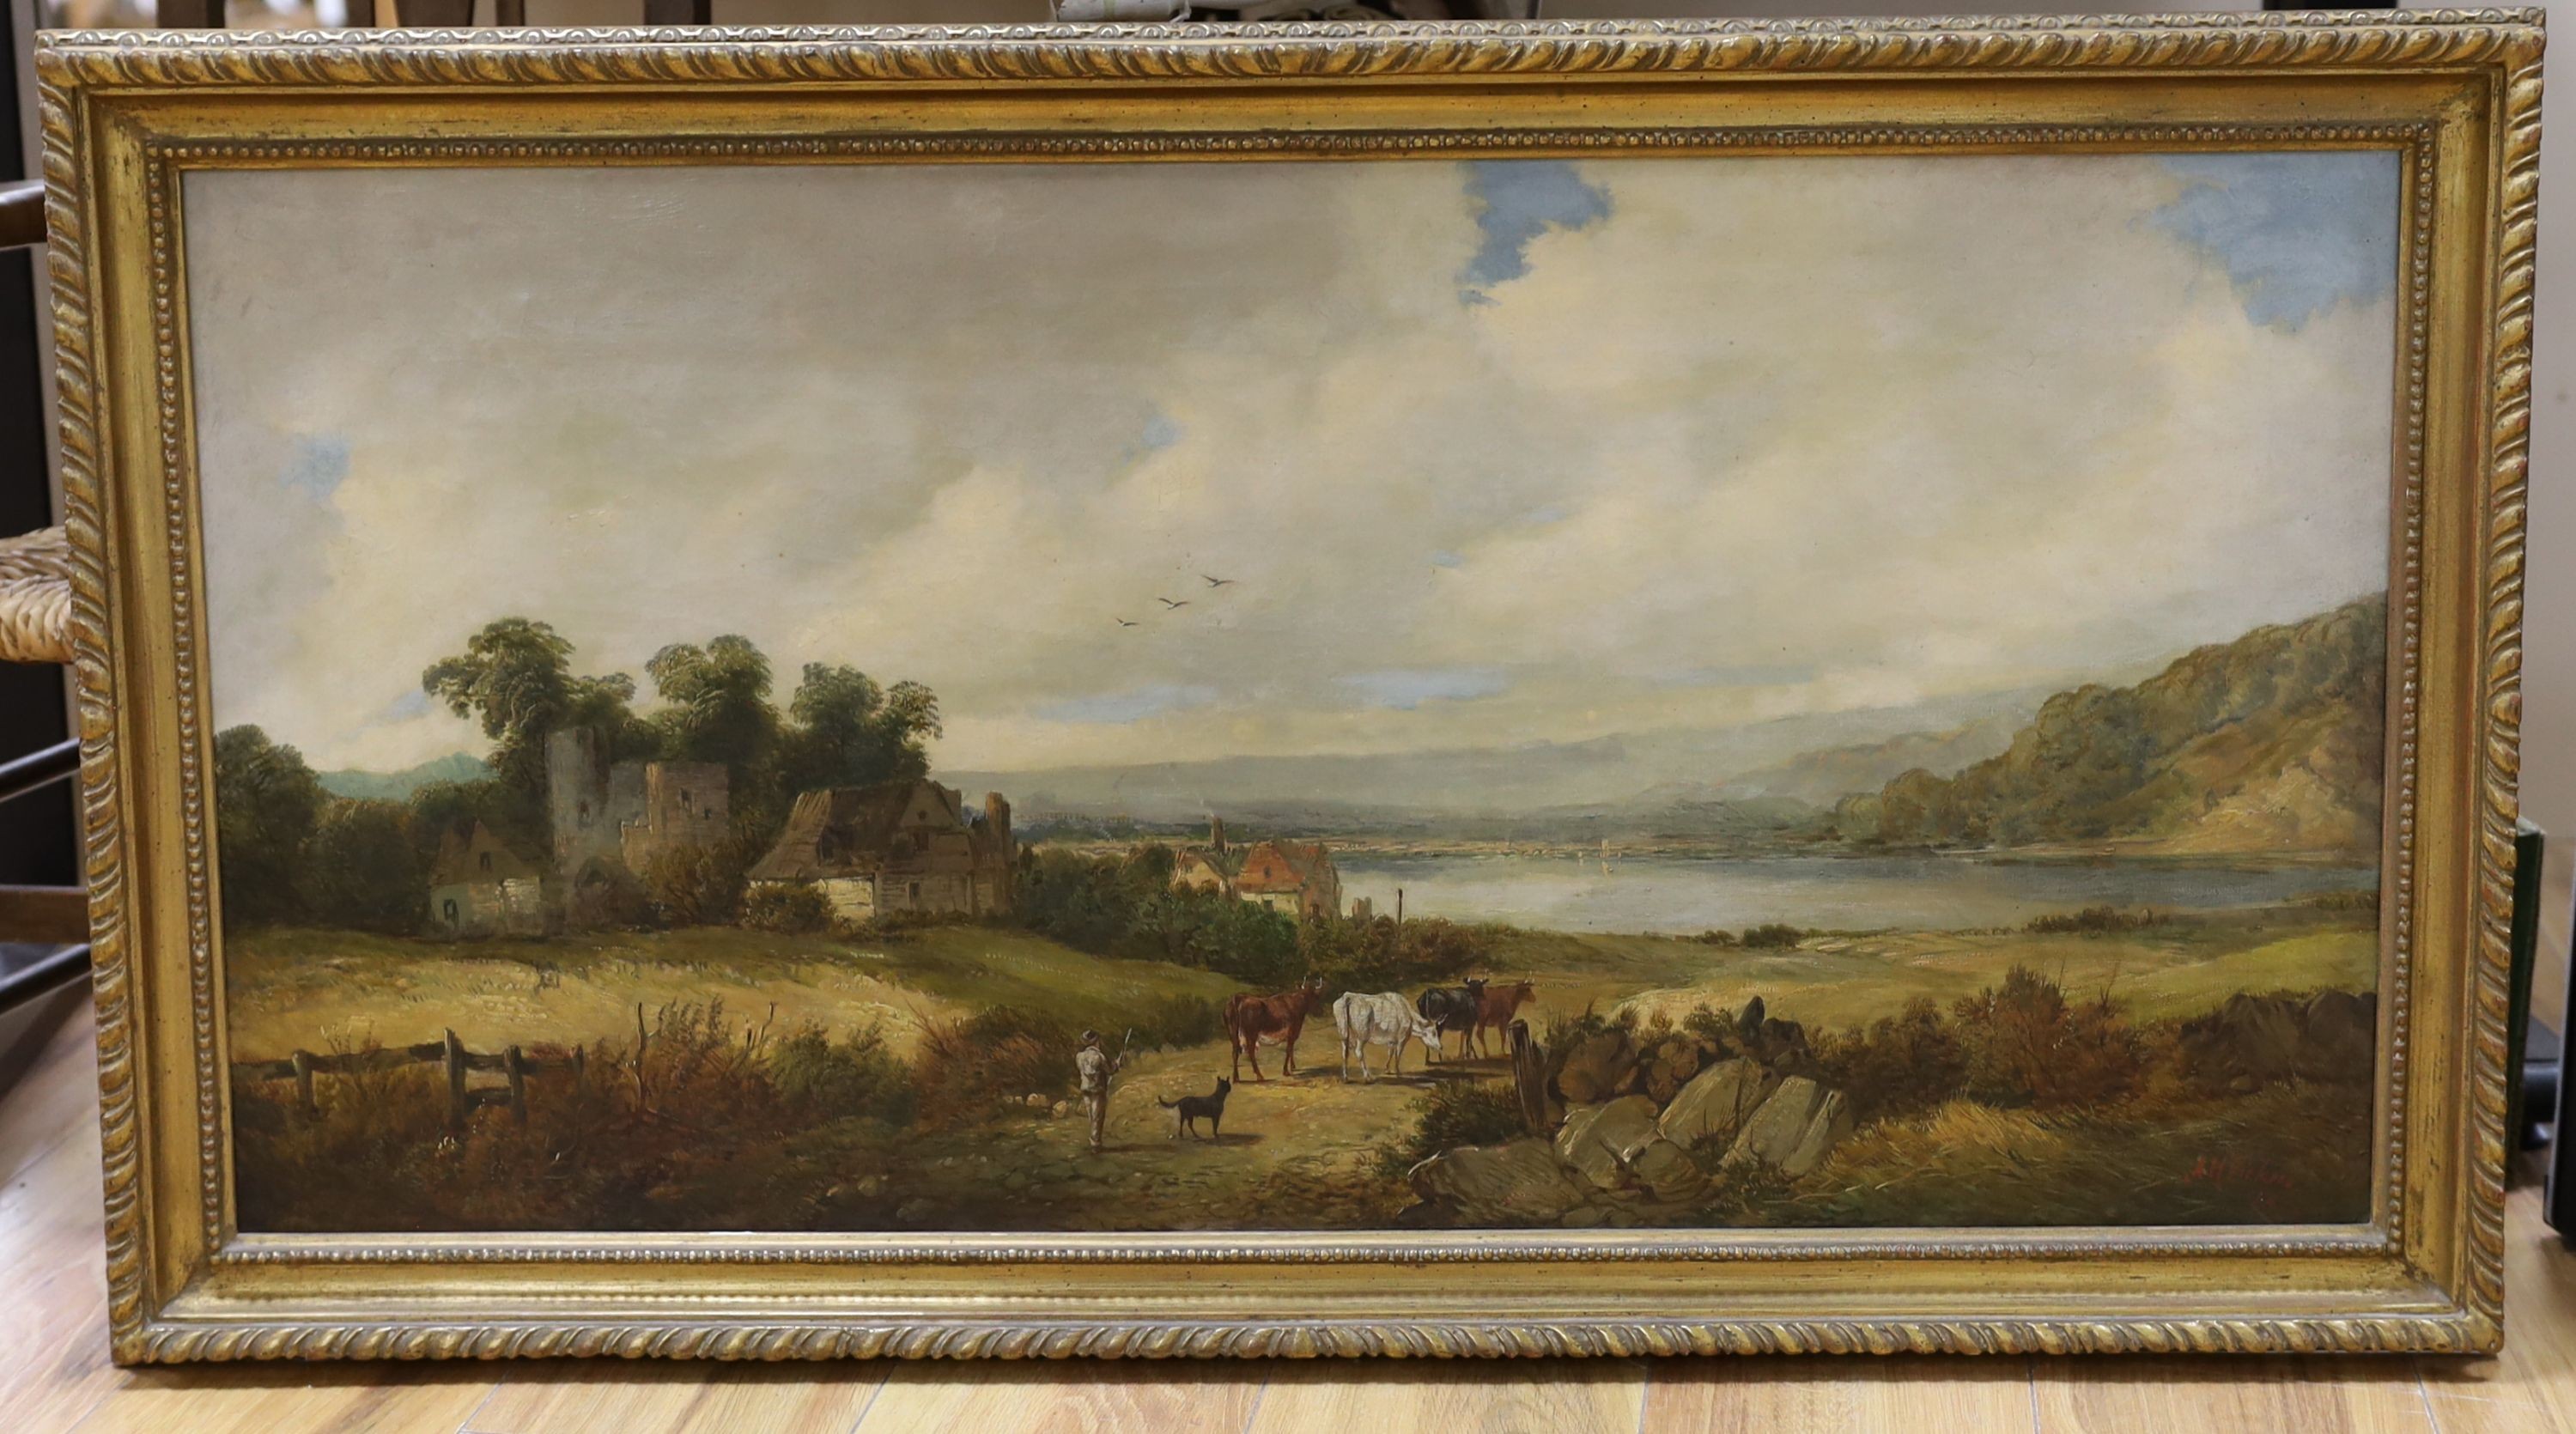 Alfred H. Vickers (1853-1907), oil on canvas, Cattle drover in an extensive landscape, signed and dated 1879, 45 x 90cm